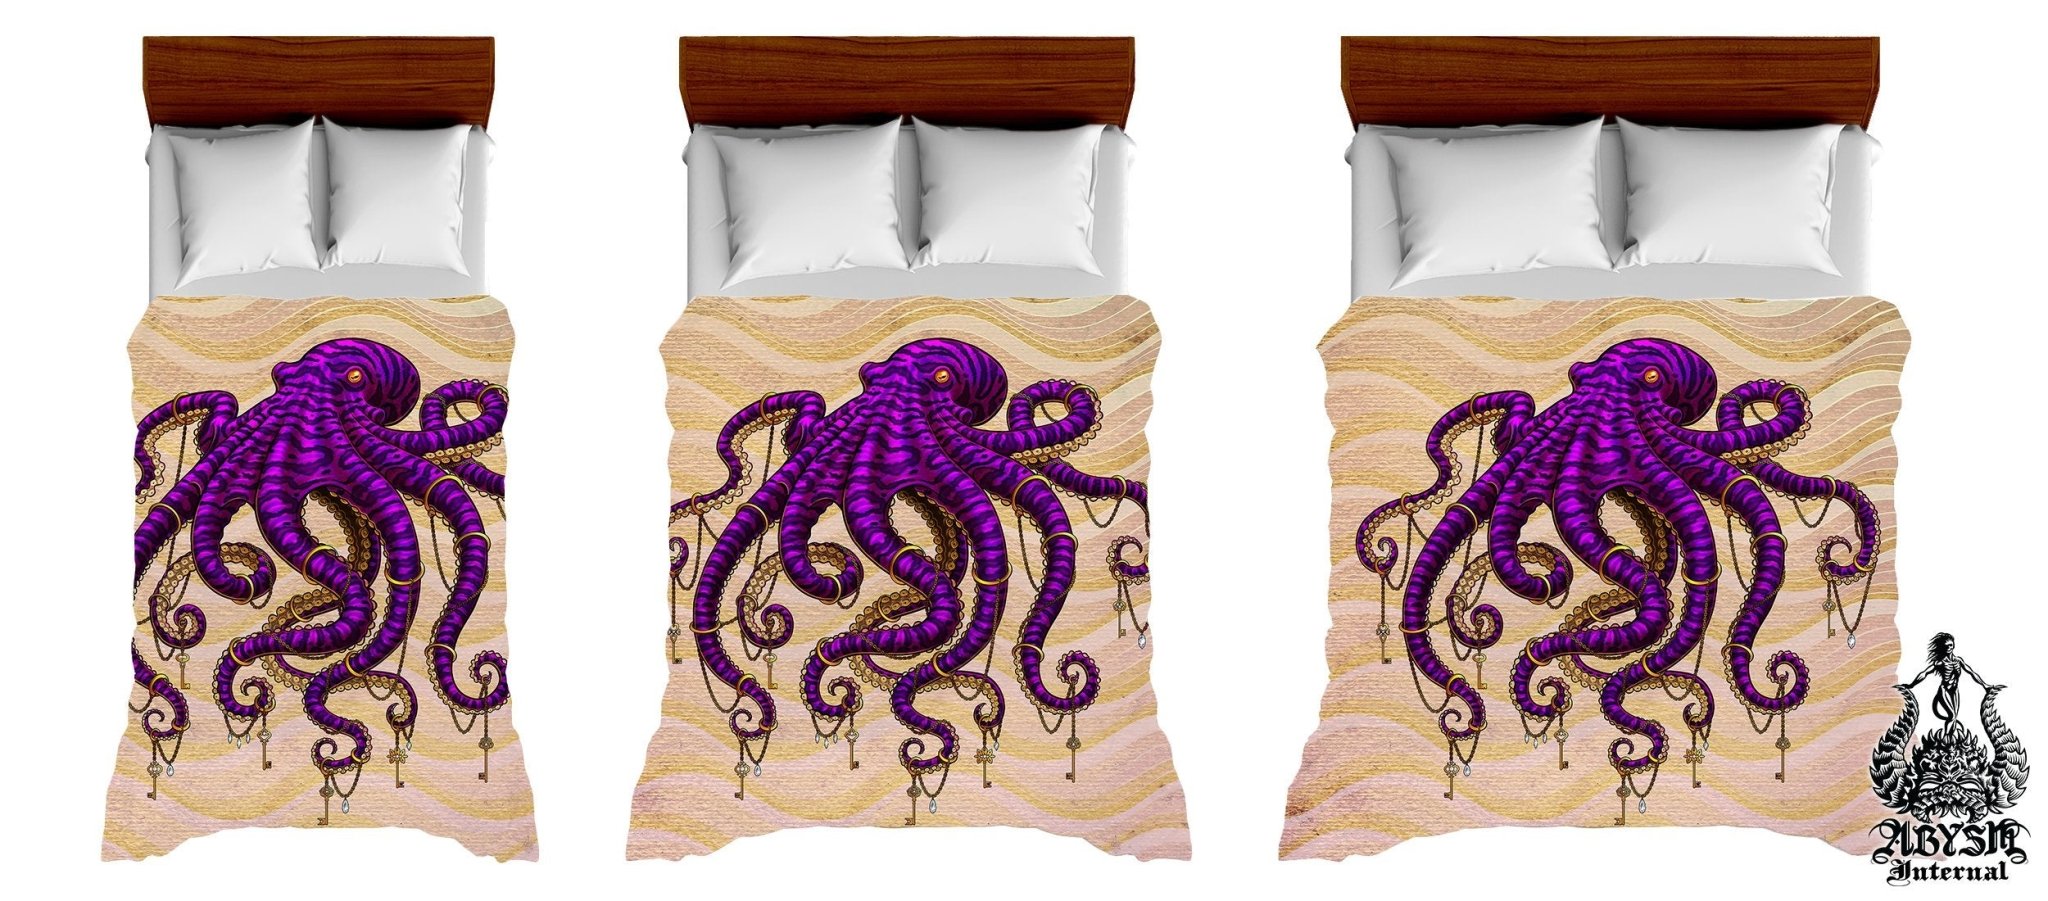 Octopus Bedding Set, Comforter and Duvet, Beach Bed Cover, Coastal Bedroom Decor, King, Queen and Twin Size - Purple - Abysm Internal